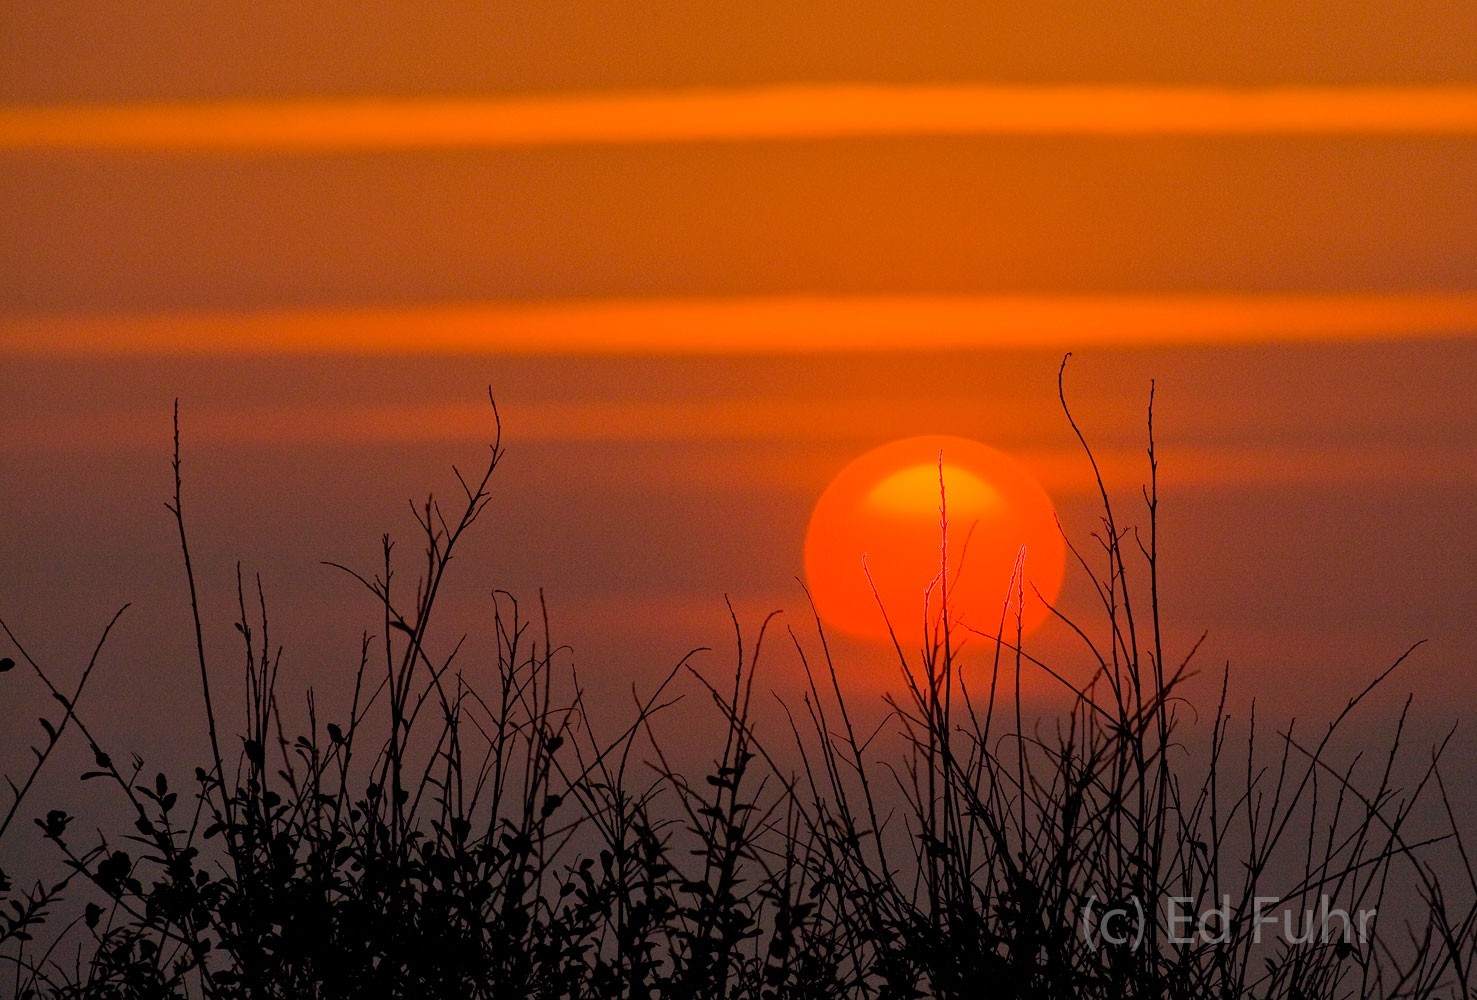 A  fiery sun rises beyond the dune and over the Atlantic.